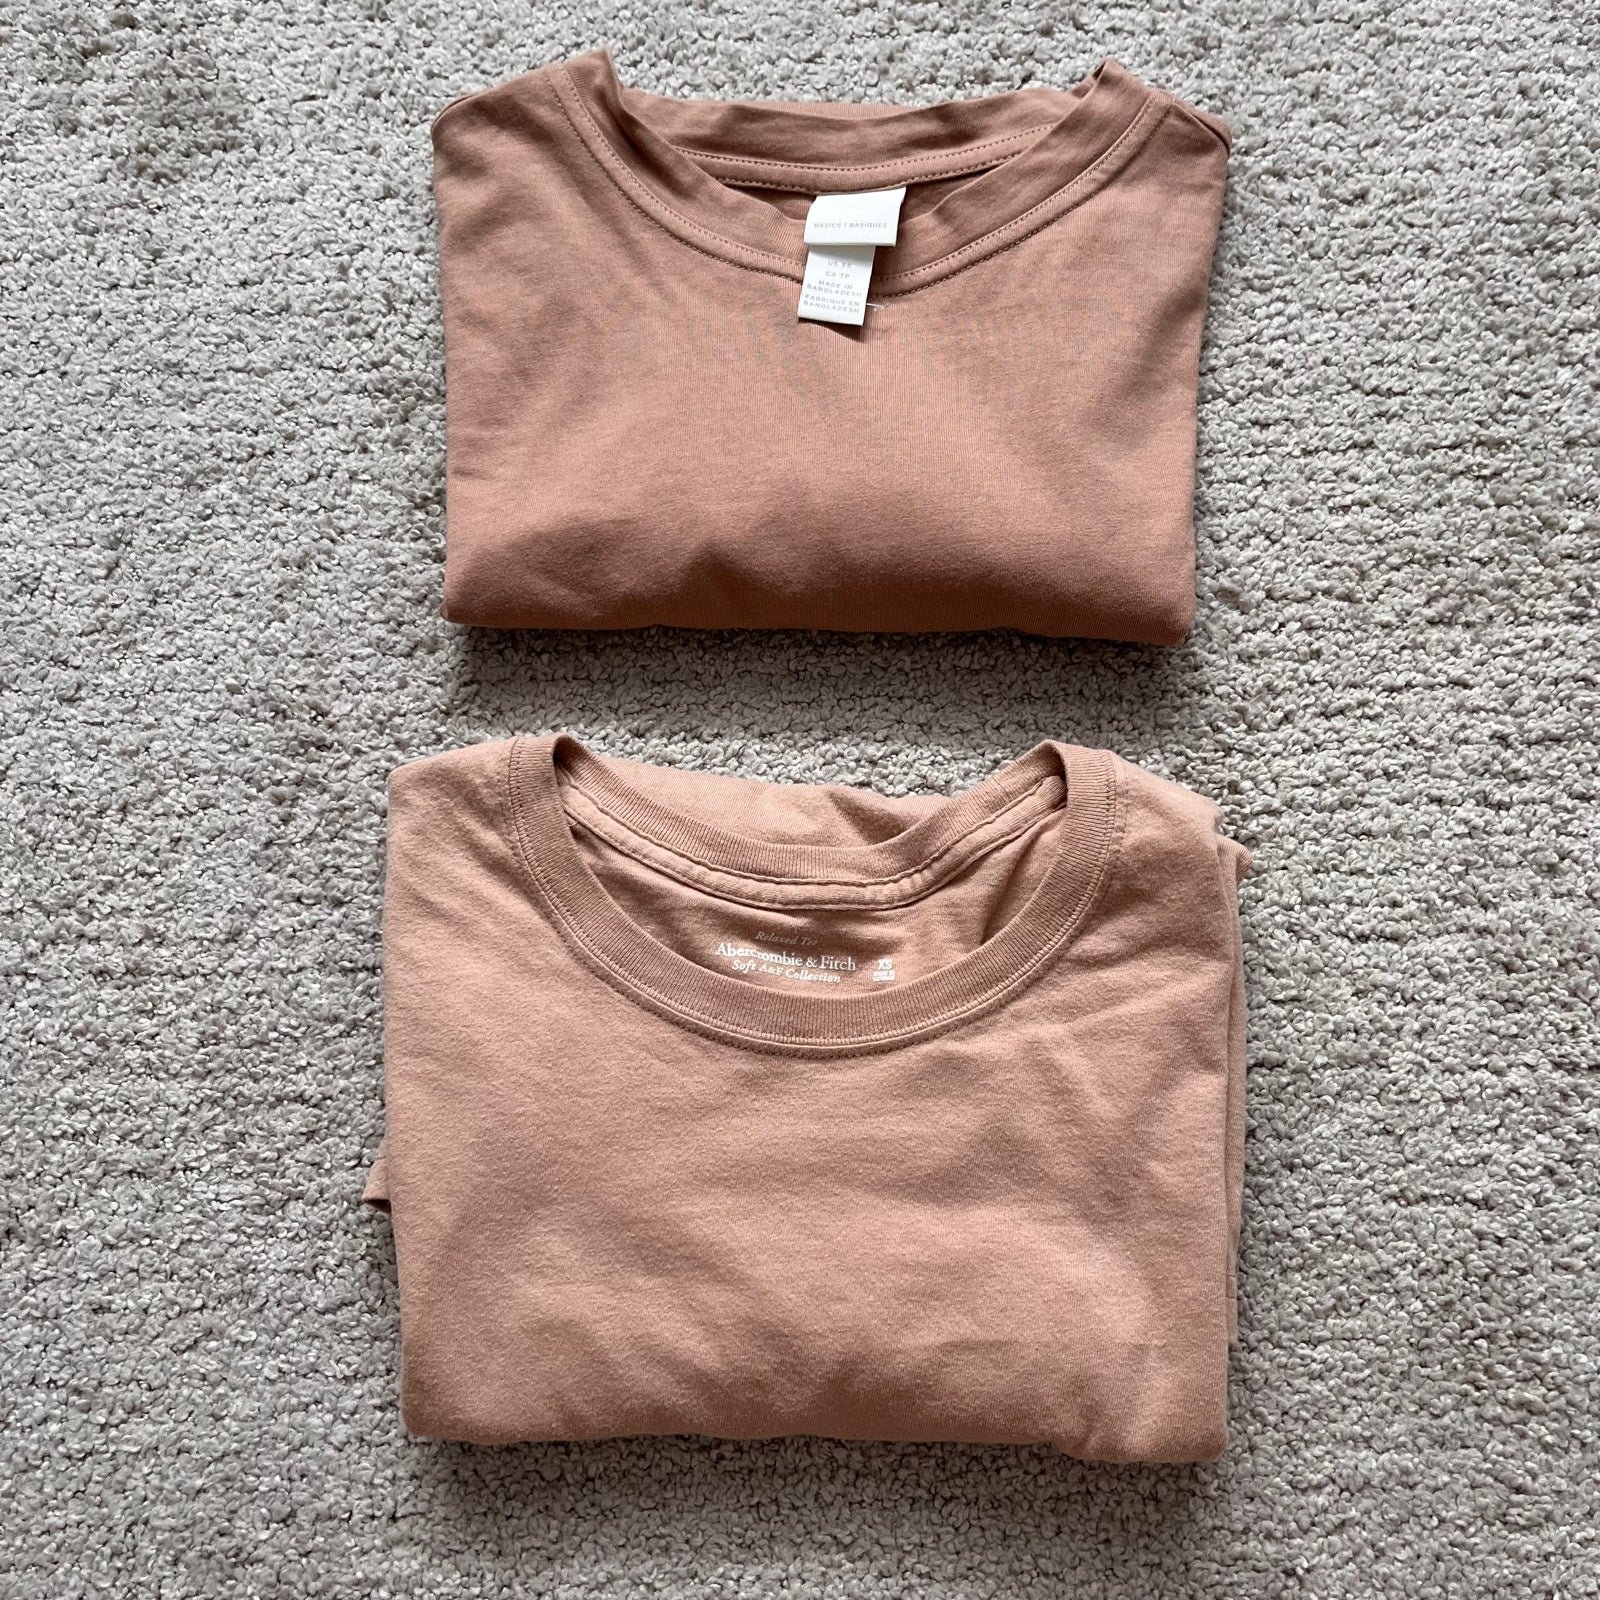 The Best Seller Bundle 2 Nude Brown Tan Tshirt Abercrombie & Fitch H&M XS GpHsy7jji High Quaity